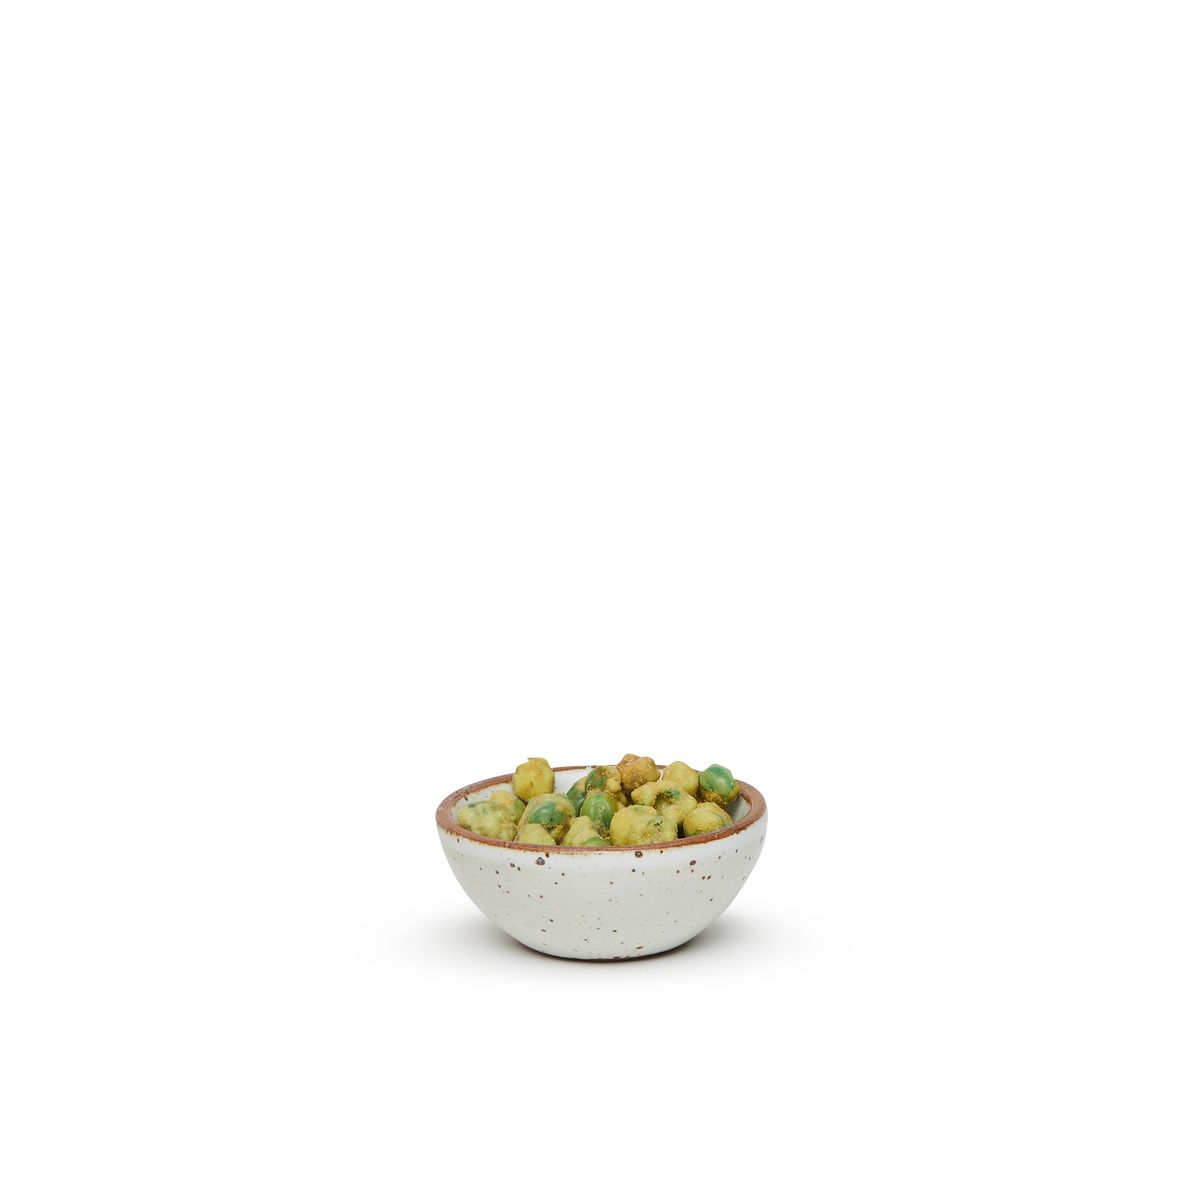 A tiny rounded ceramic bowl in a cool white color featuring iron speckles and an unglazed rim, filled with wasabi peas